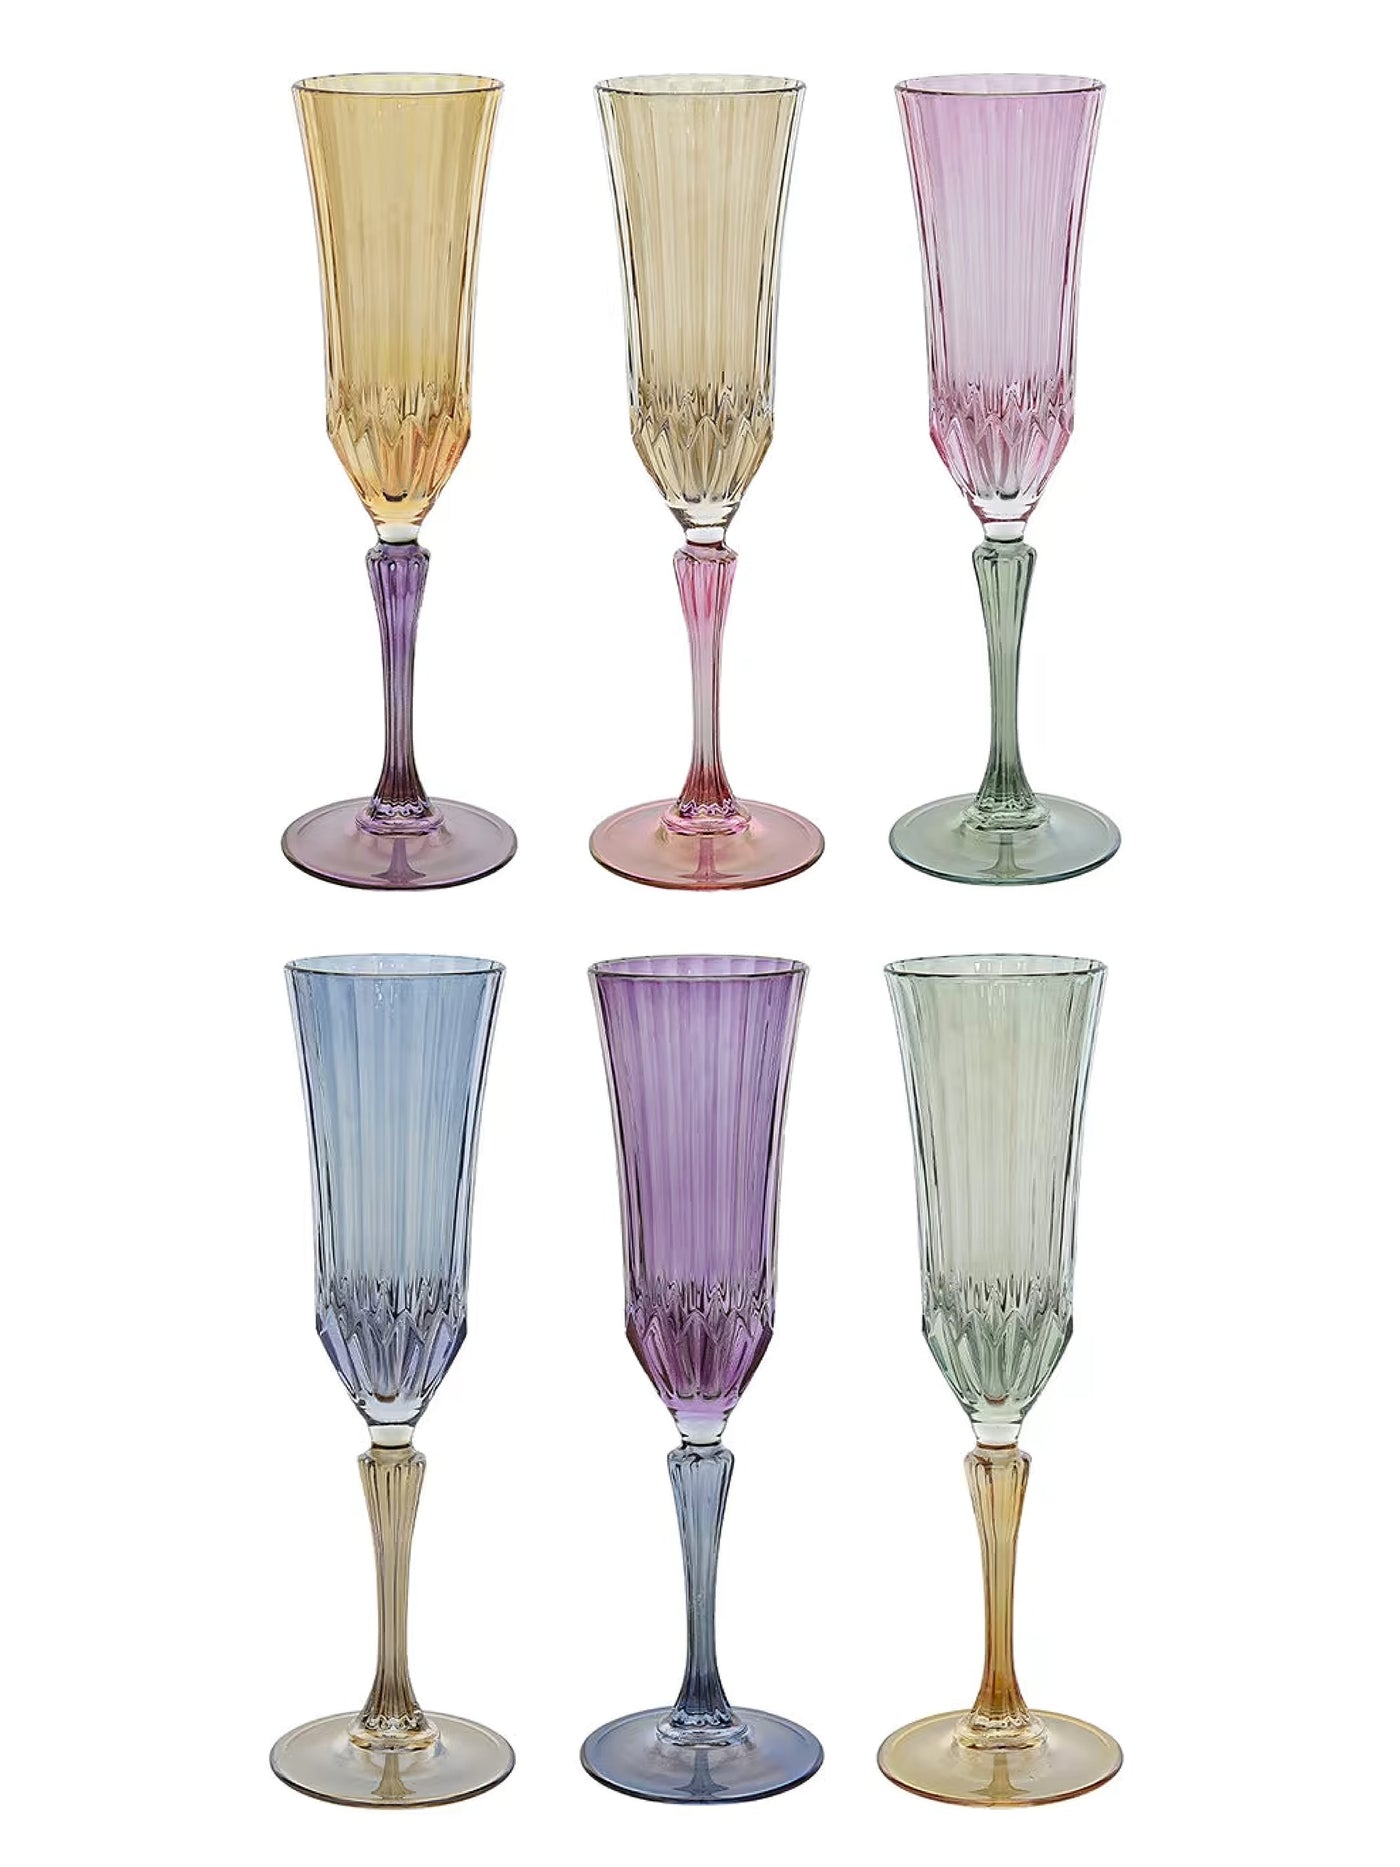 Ada Pastel Champagne Flute Set by Creart